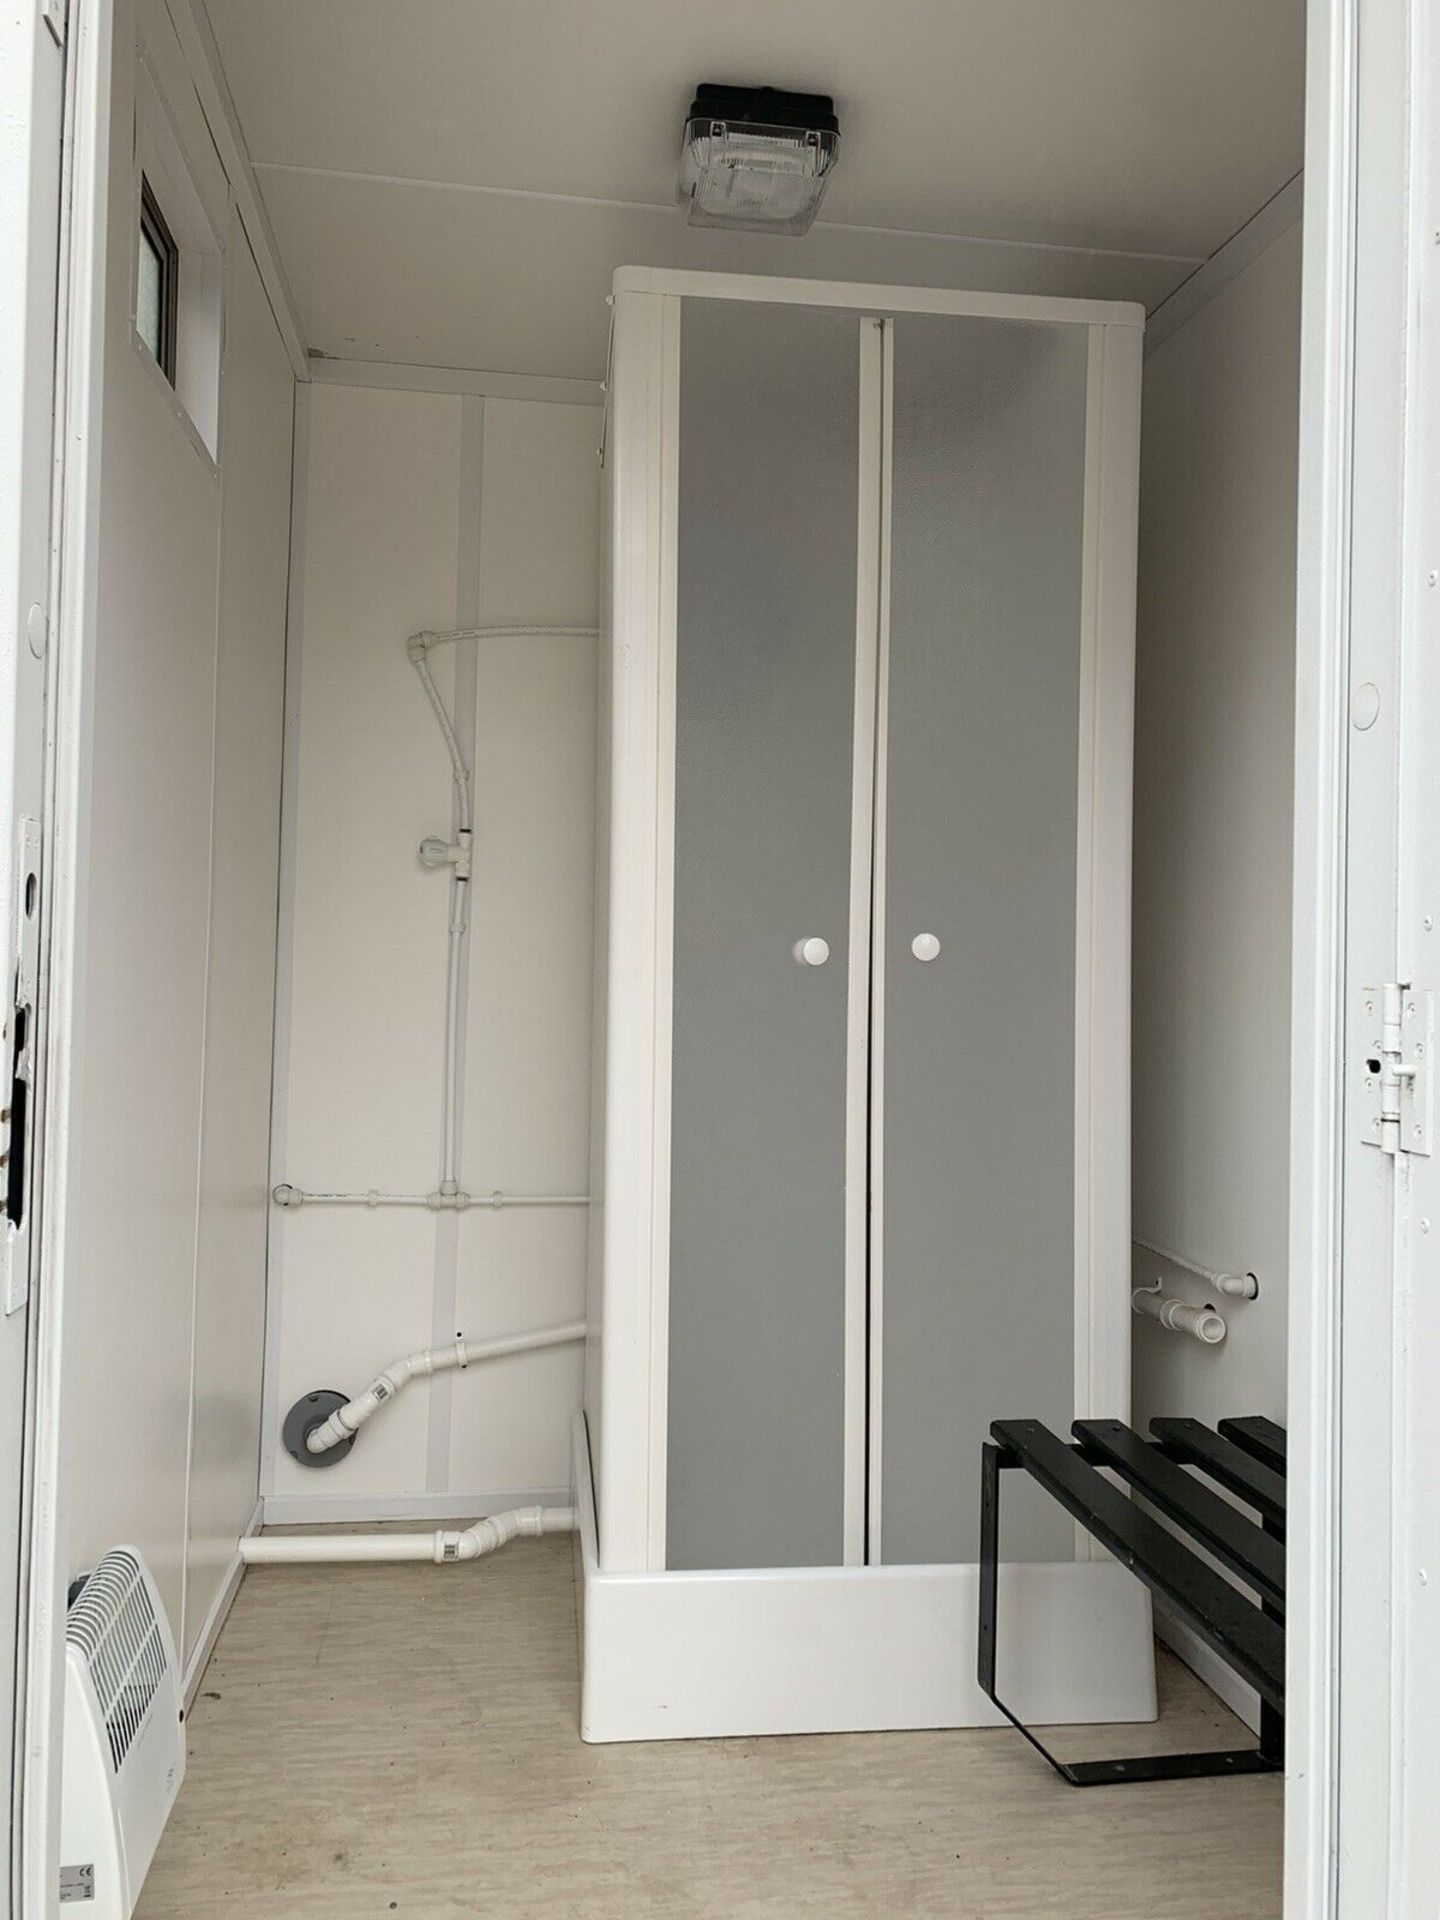 Portable Shower Drying Room With Toilets - Image 3 of 11